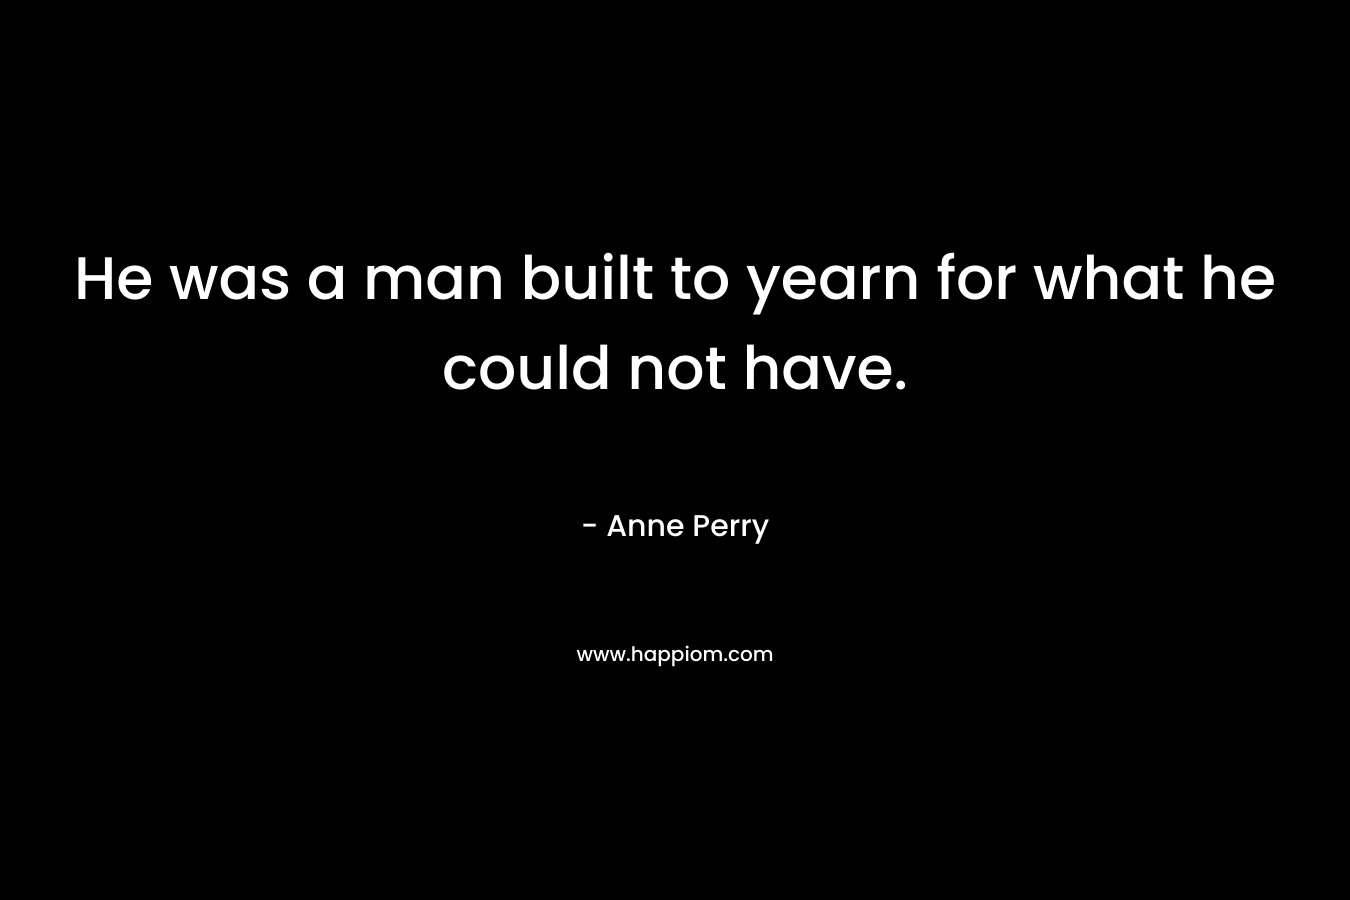 He was a man built to yearn for what he could not have. – Anne Perry